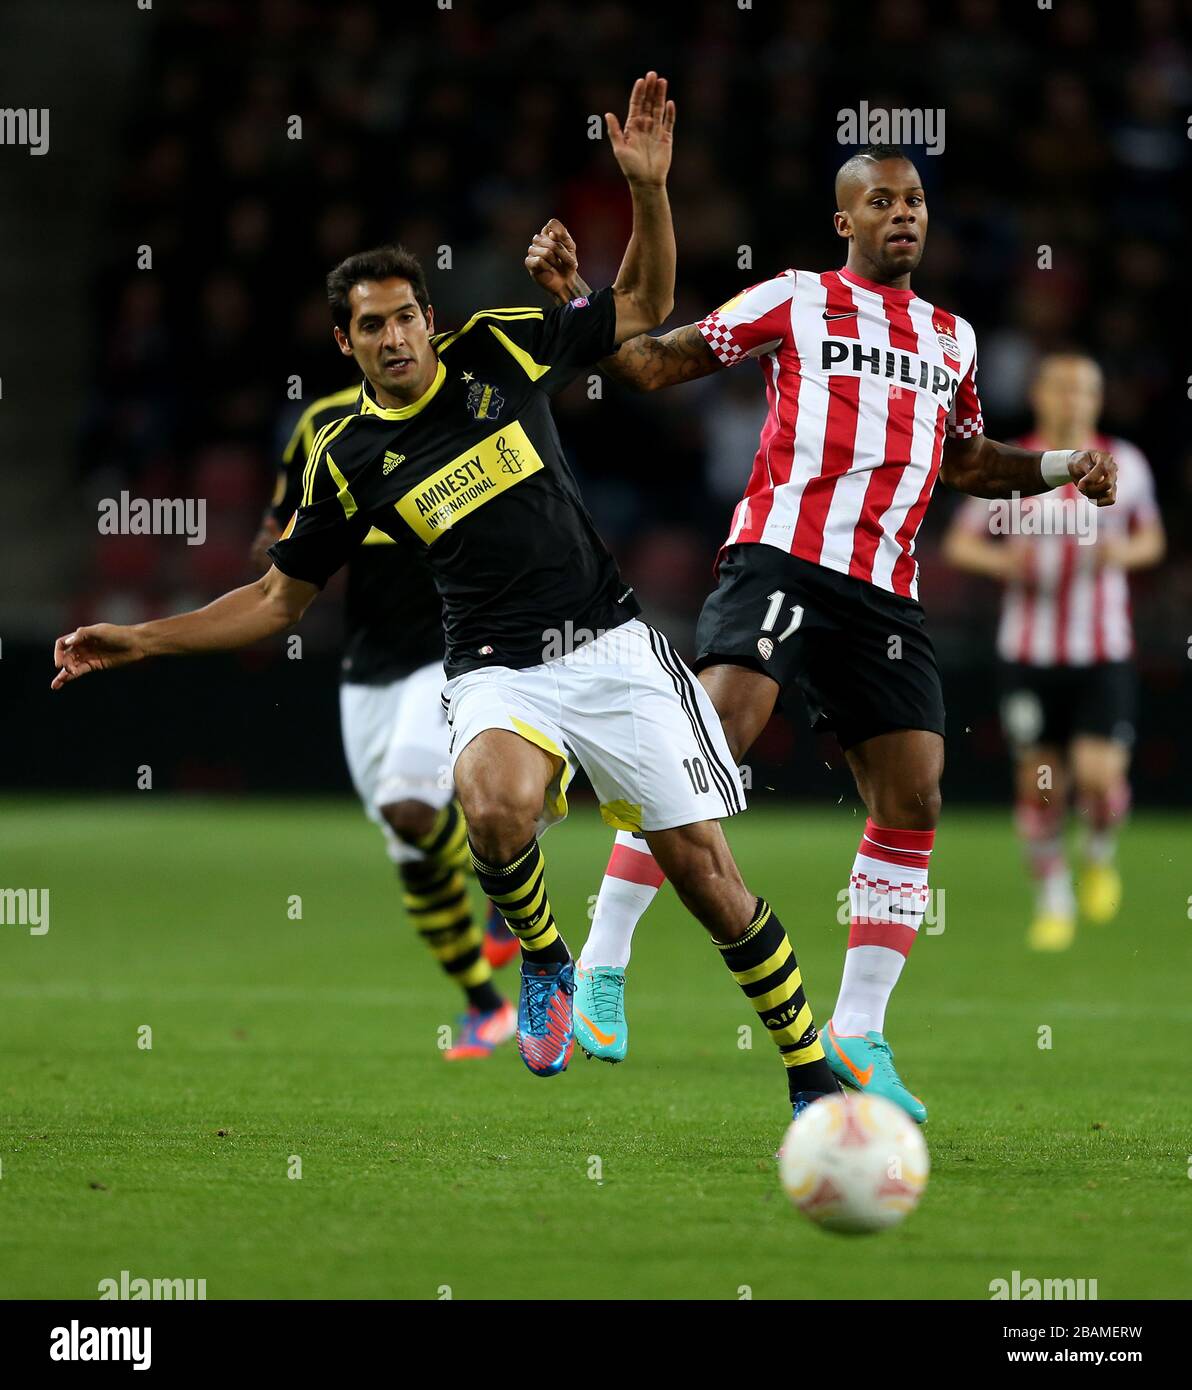 PSV Eindhoven's Jeremain Lens and AIK's Celso Borges Stock Photo